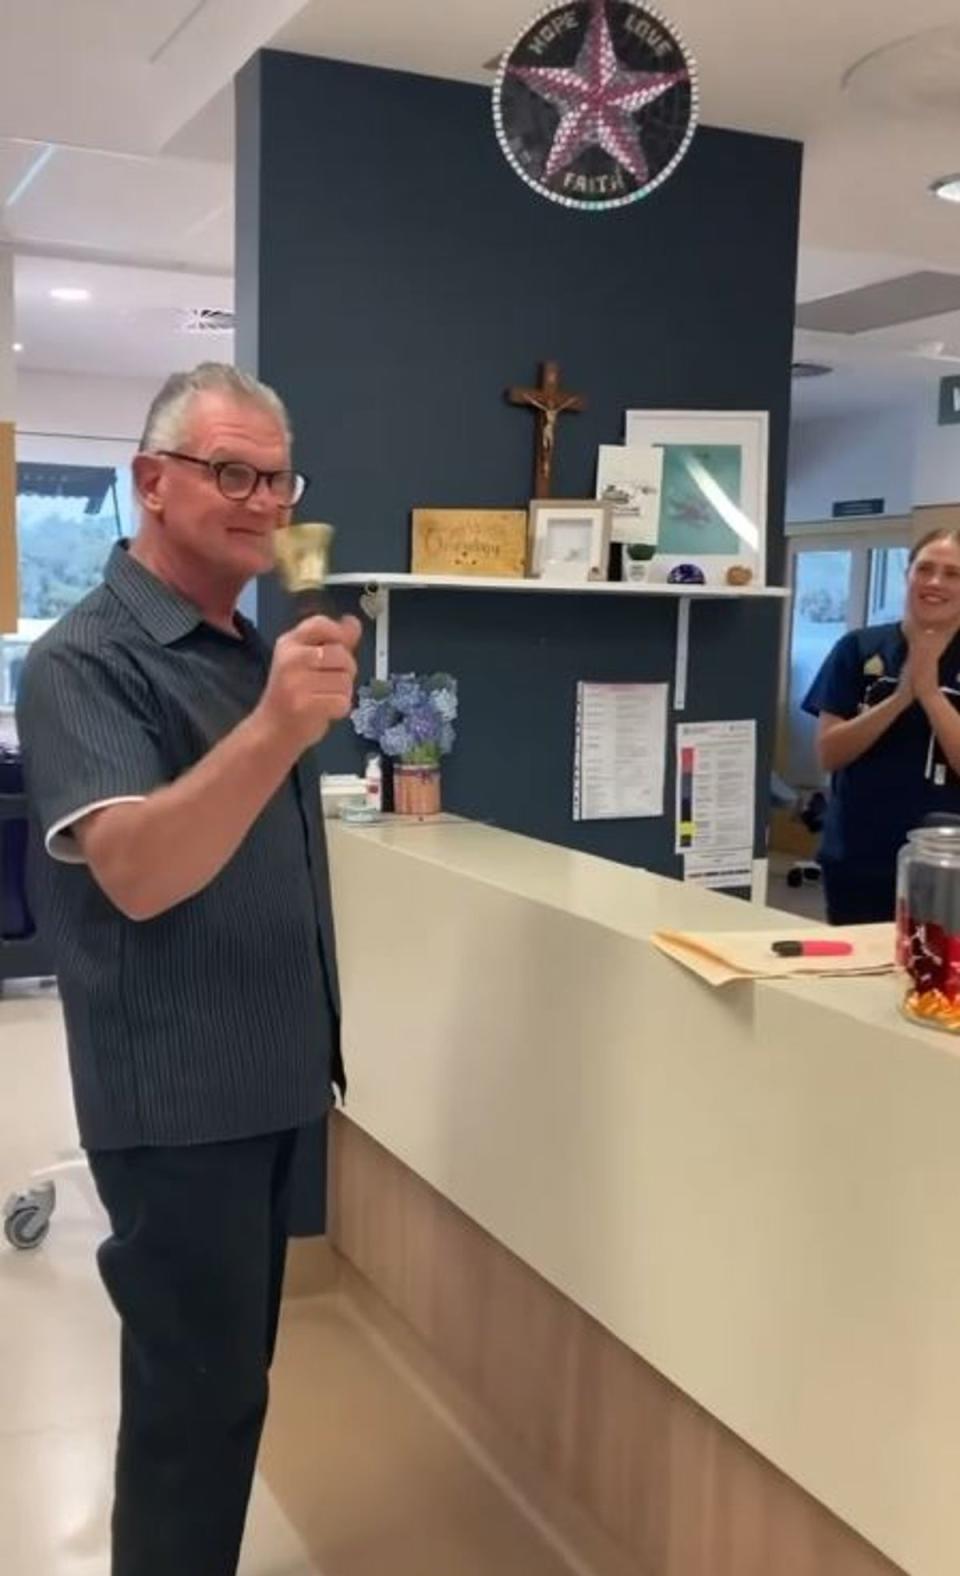 Dianne Buswell shared a picture of her dad ringing a bell to signal the end of his chemotherapy treatment (Instagram @diannebuswell)